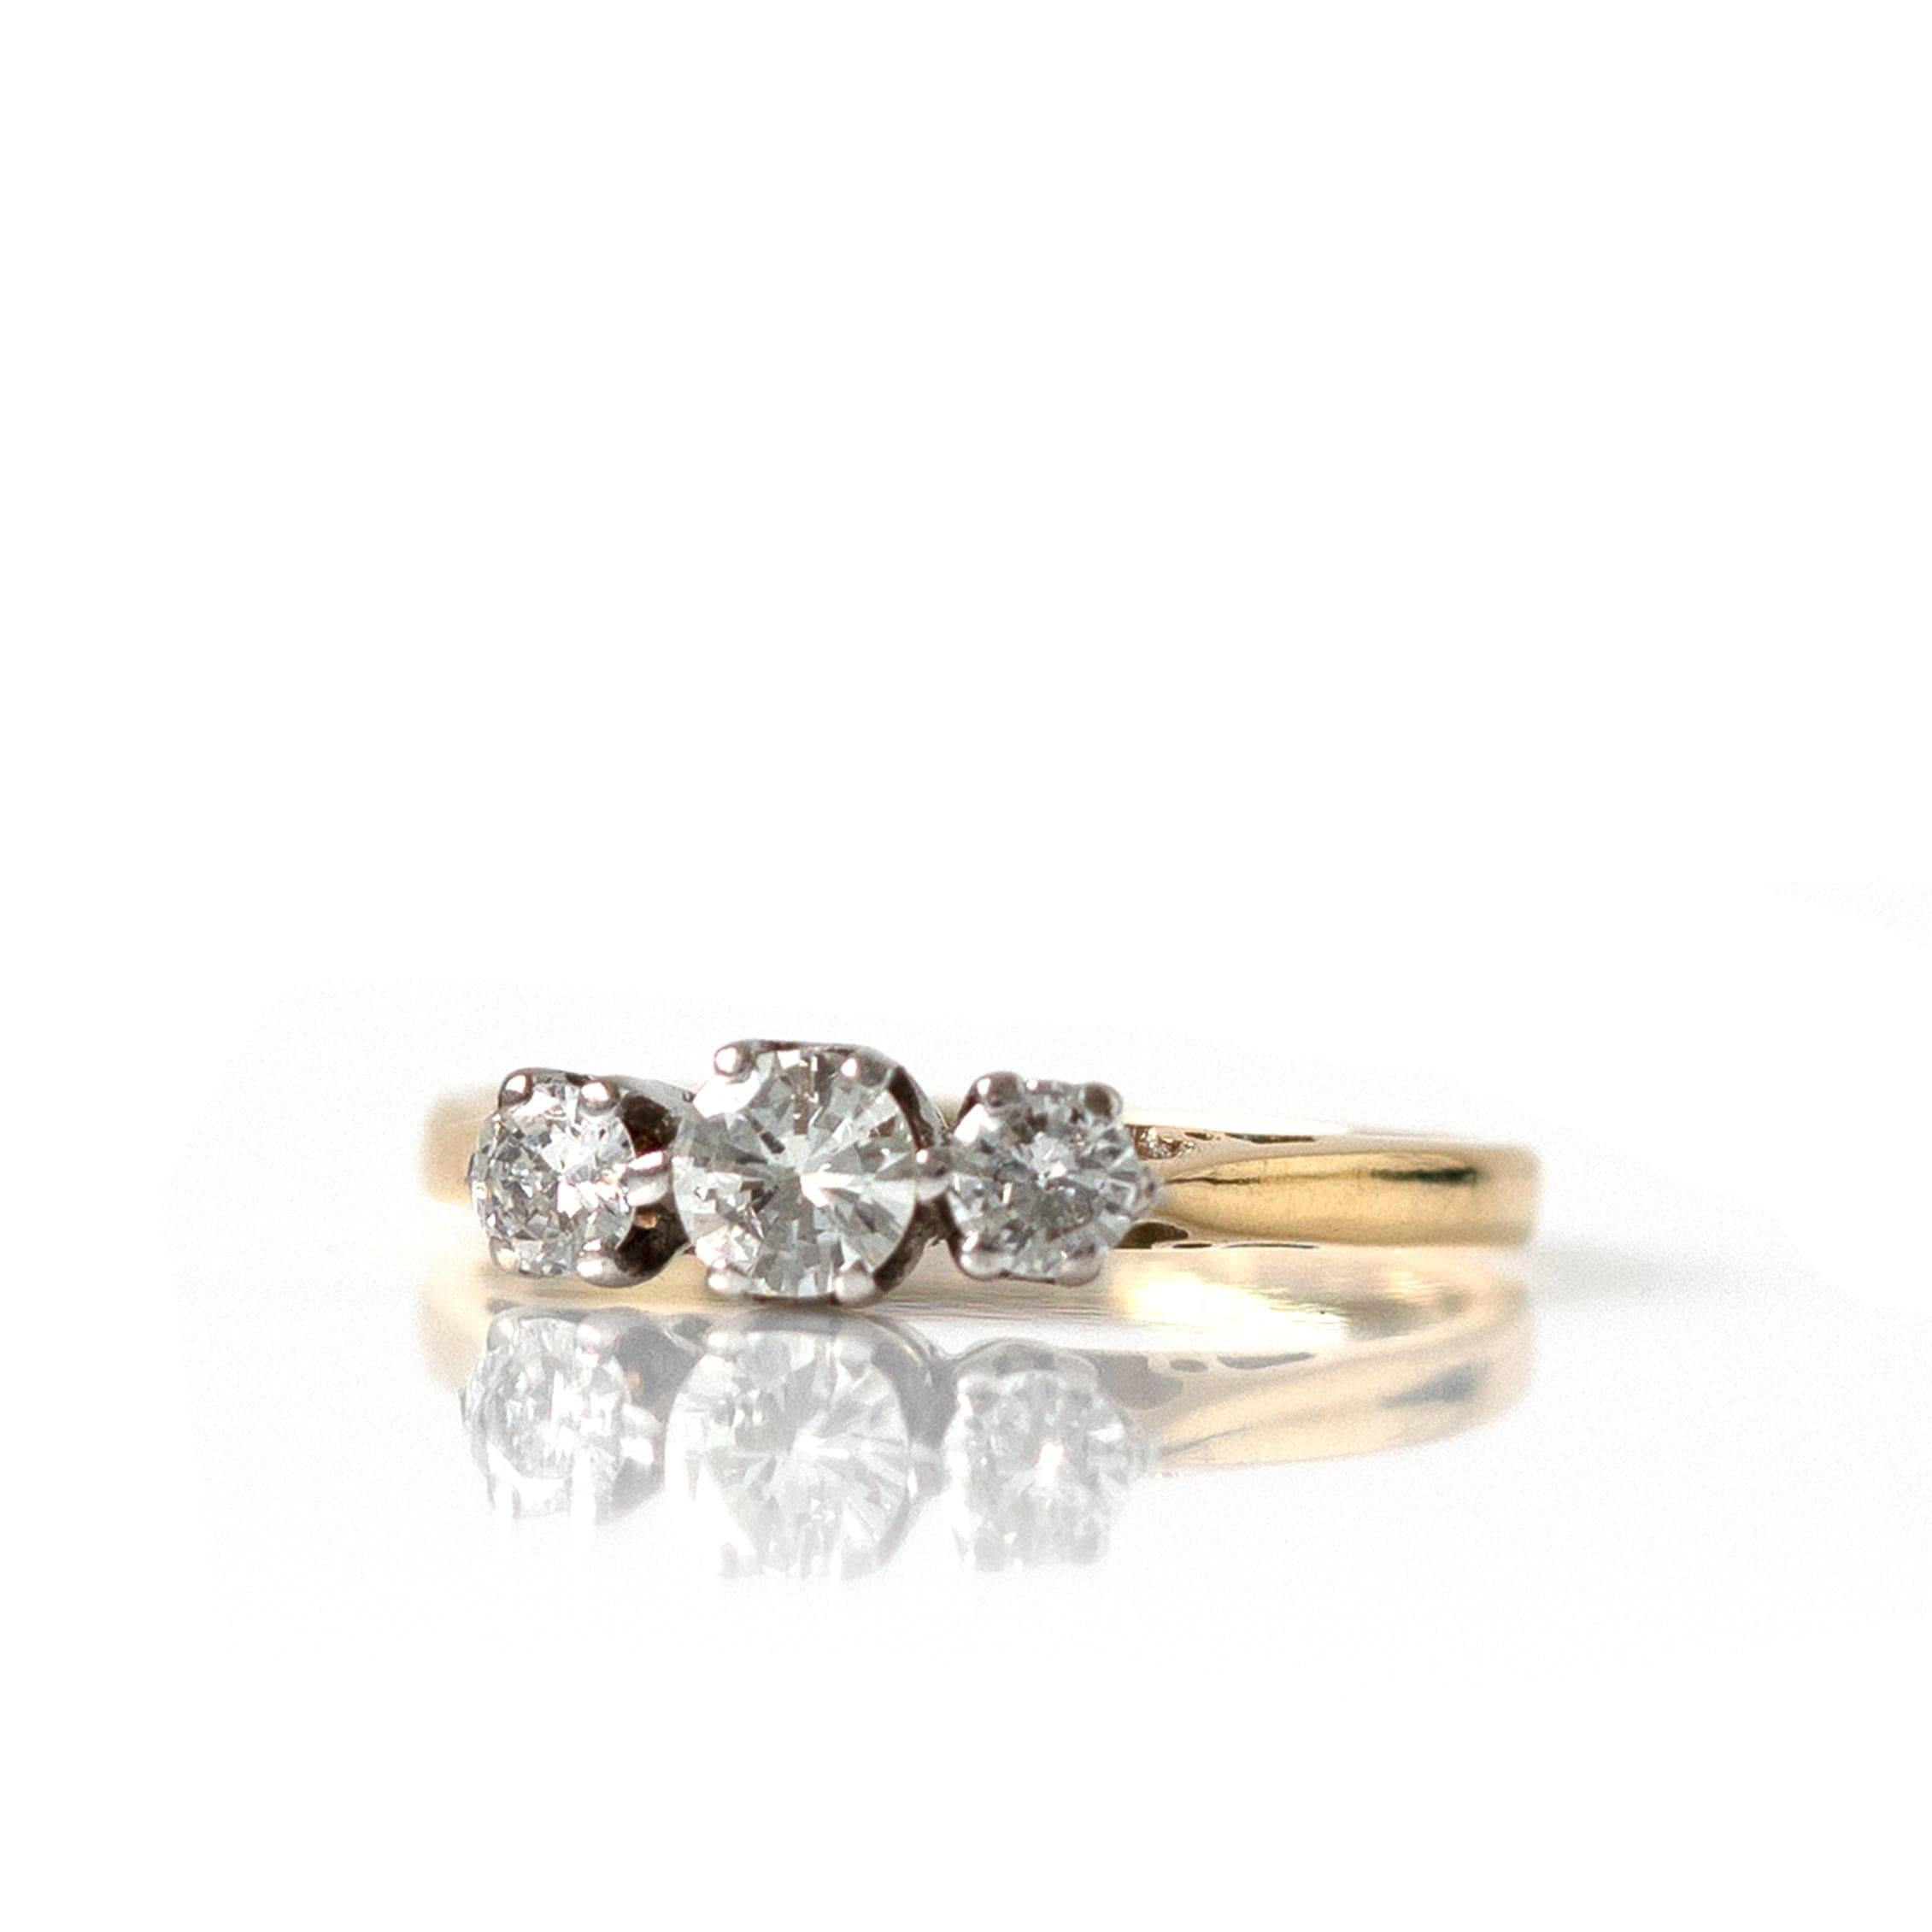 Vintage 1940s 18 Carat Gold 0.42 Carat Diamond Ring In Excellent Condition For Sale In London, GB